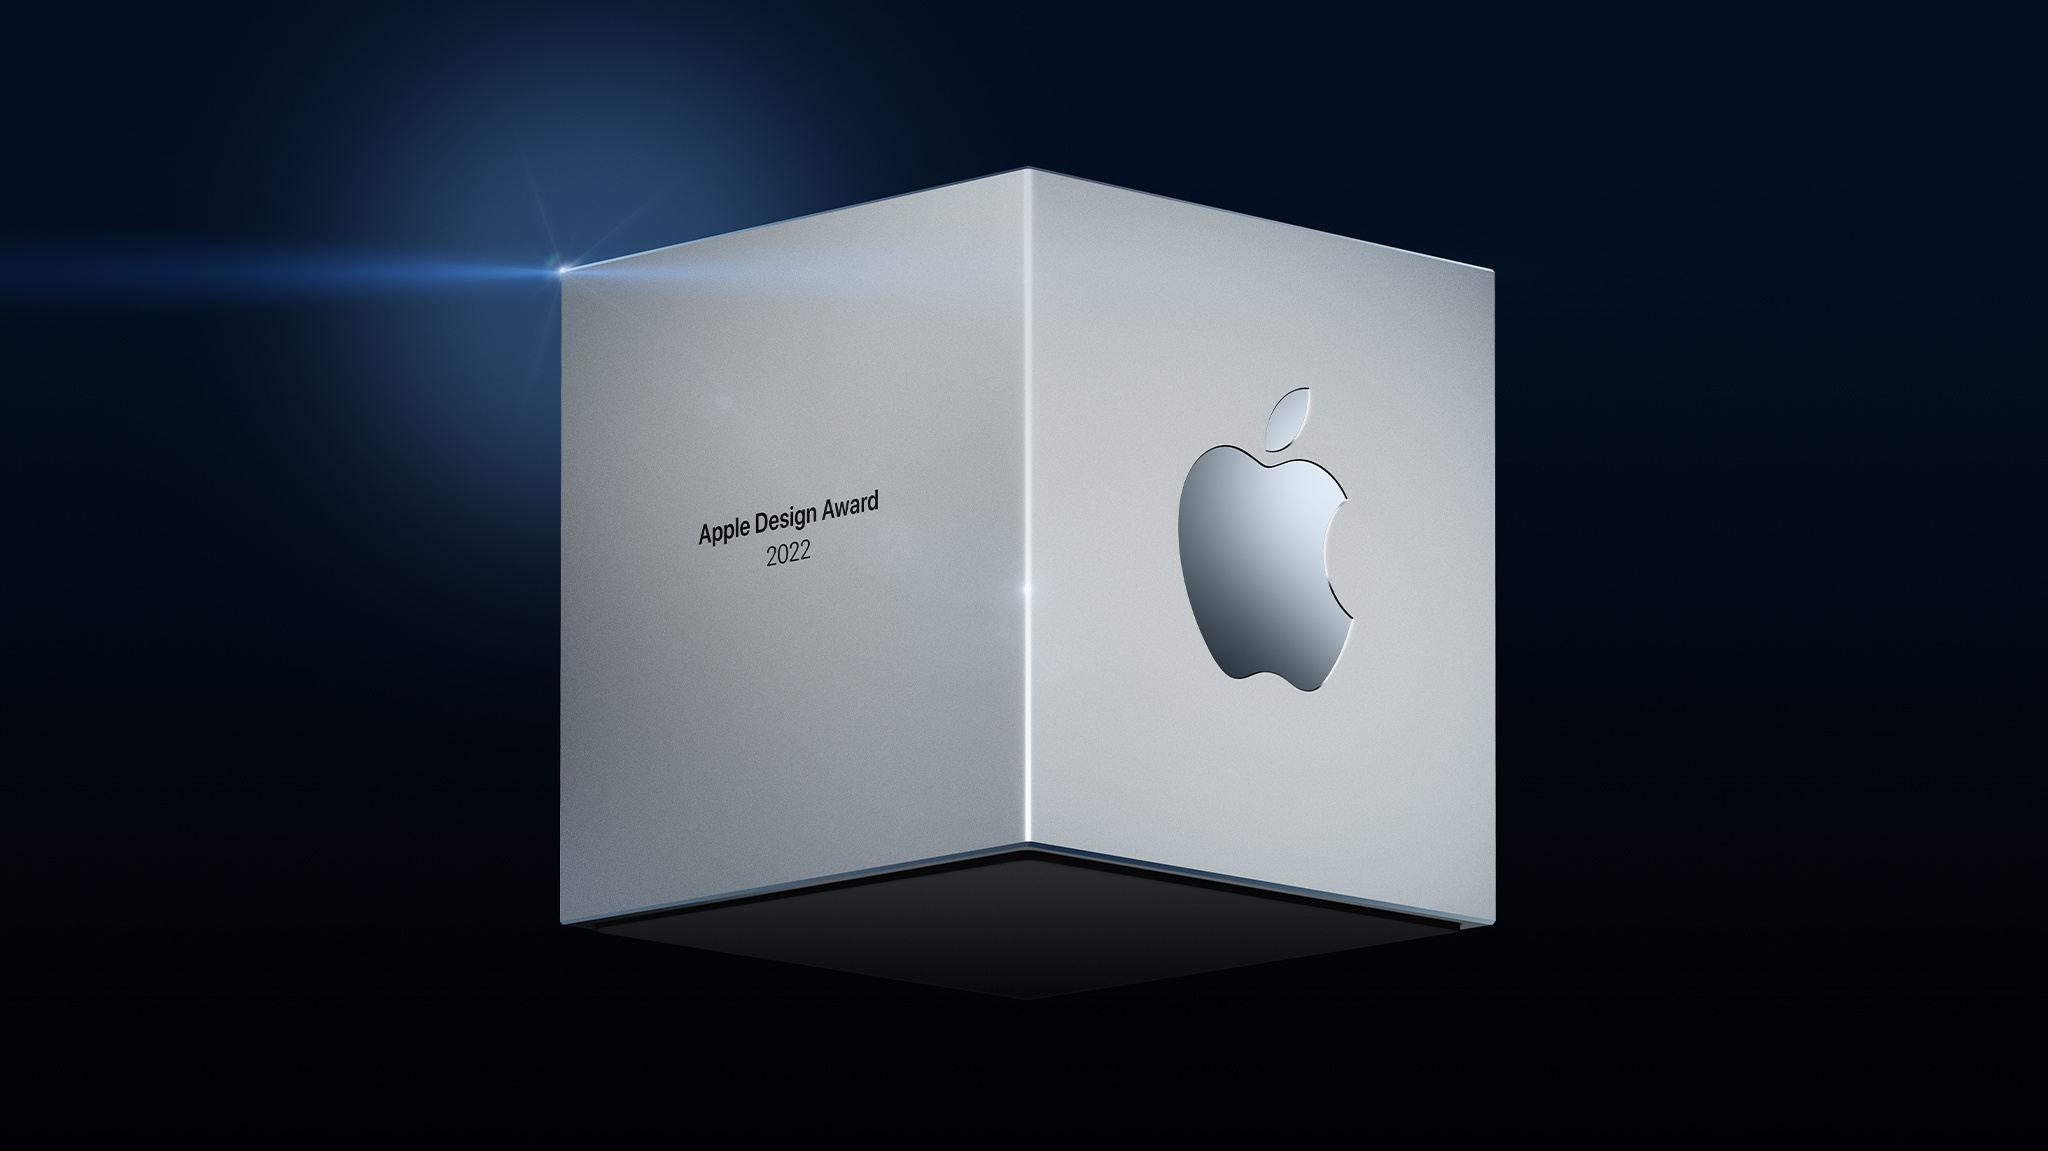 A stylized rendering of the engraved metal cube presented to Apple Design Award recipients.